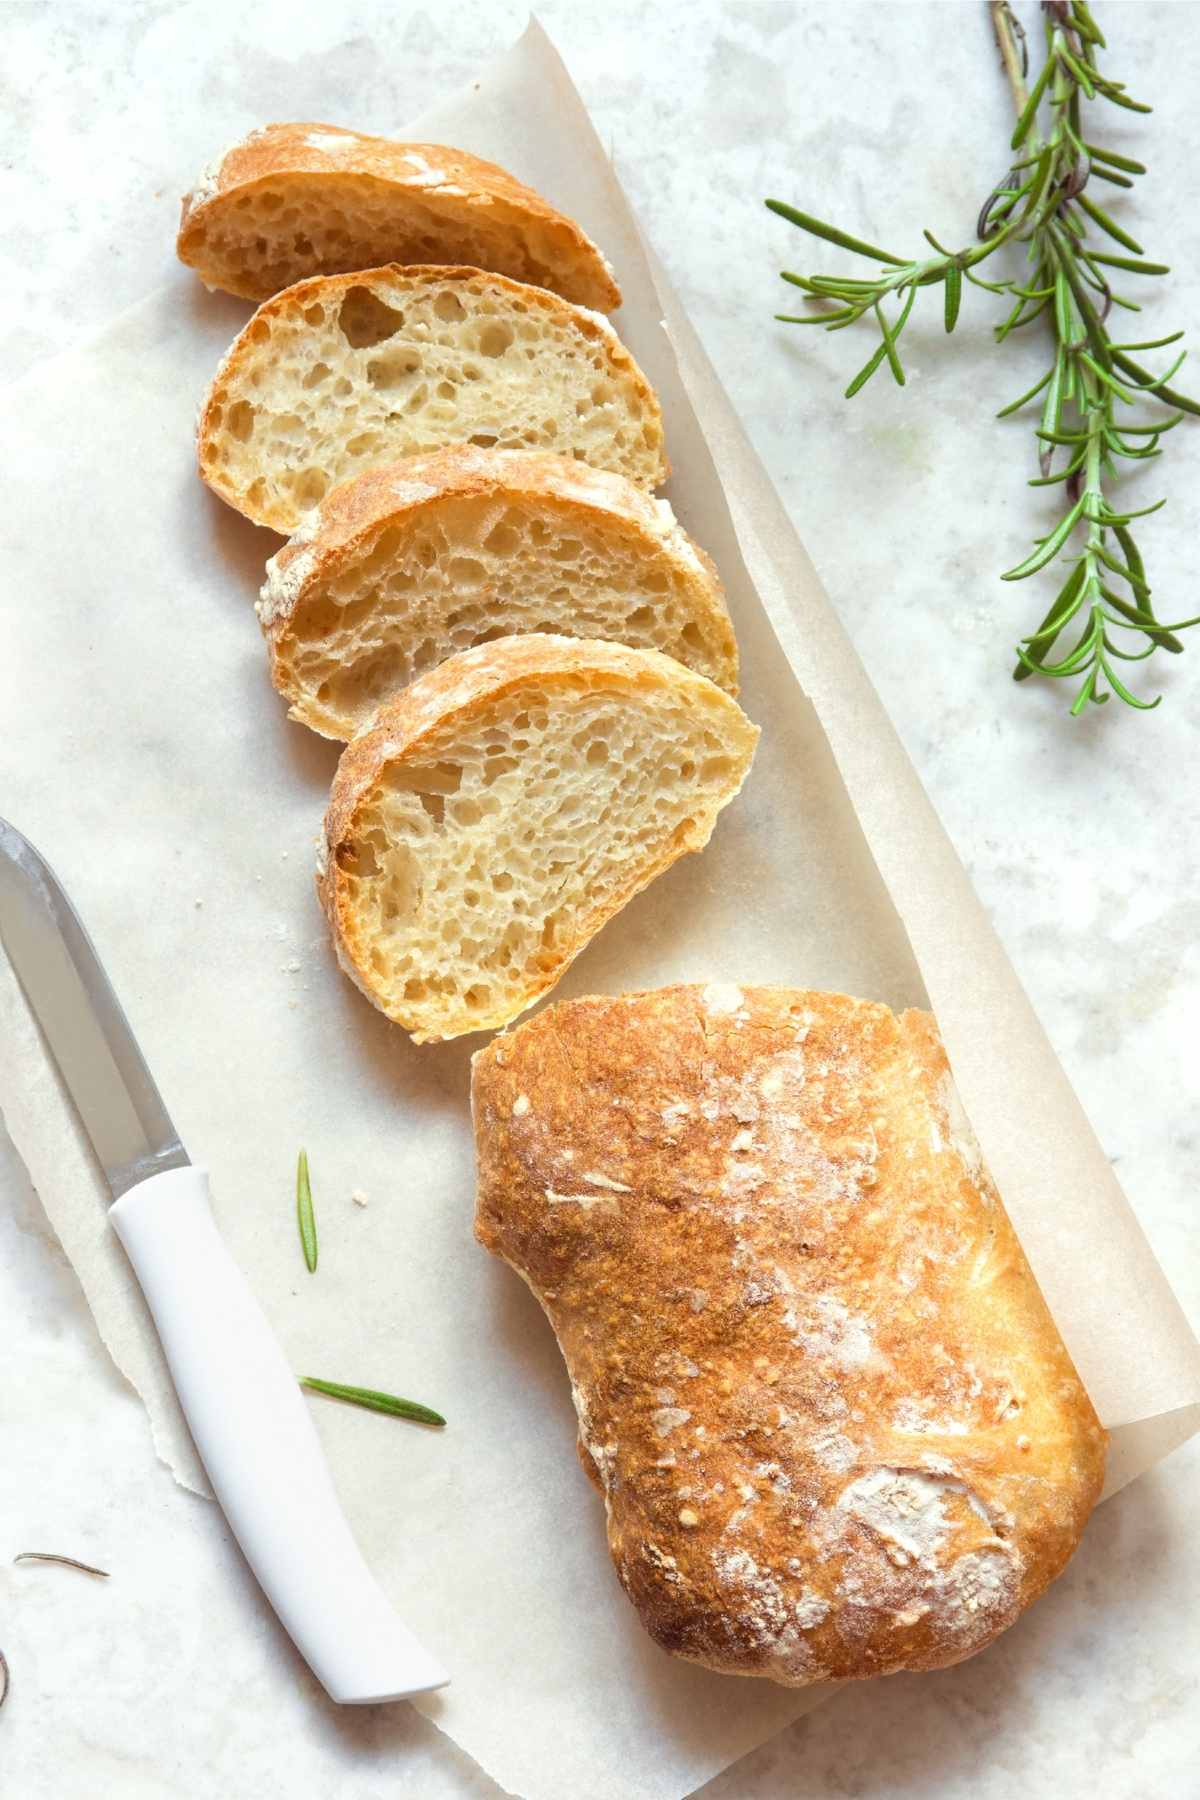 Here’s your chance to get started with bread making. This homemade Cuban Bread doesn’t require a mixer or any special pans, and uses a handful of basic ingredients.